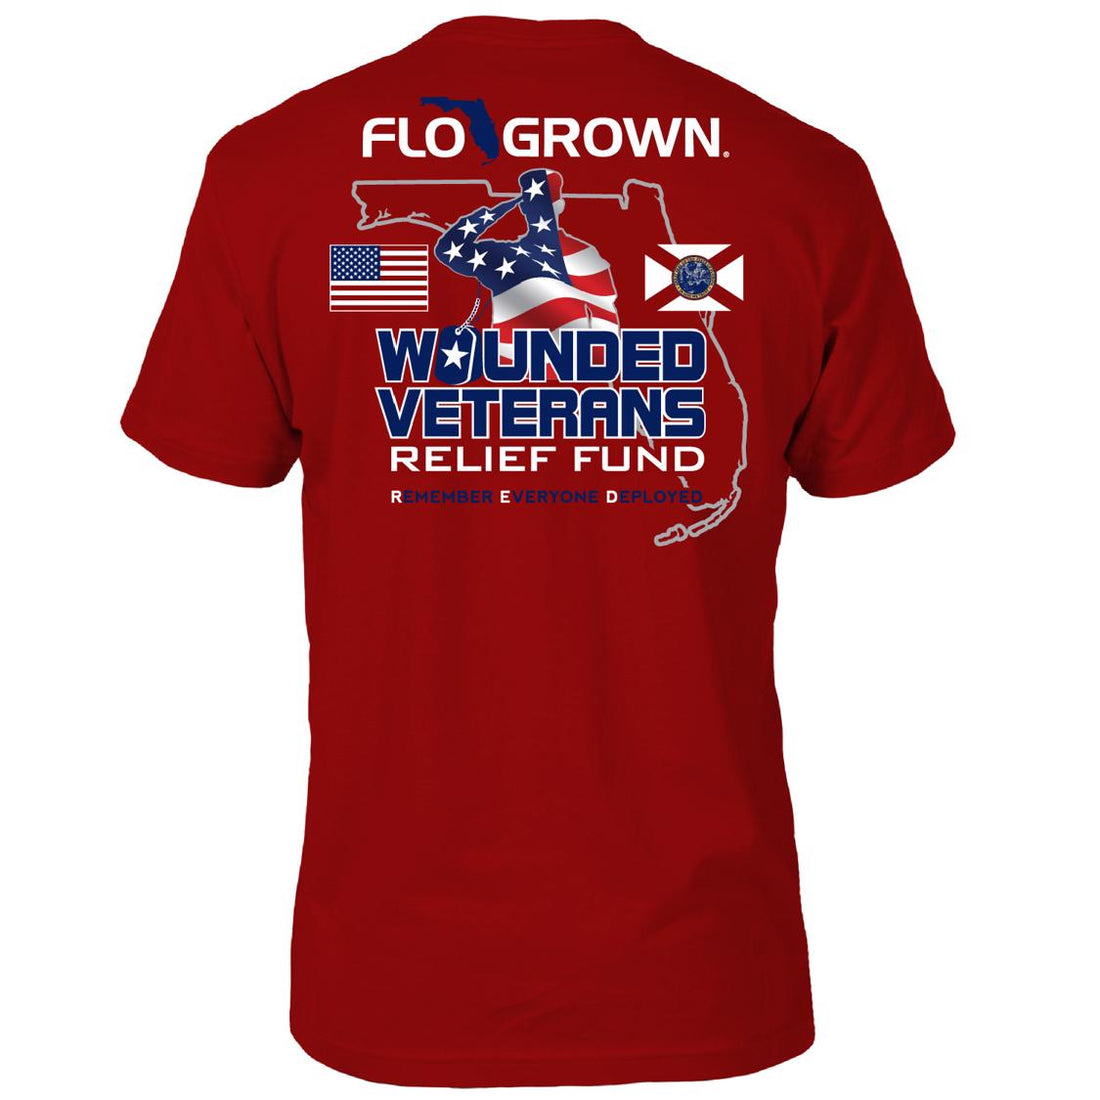 FloGrown Proudly Partners with the Wounded Veterans Relief Fund for RED Friday